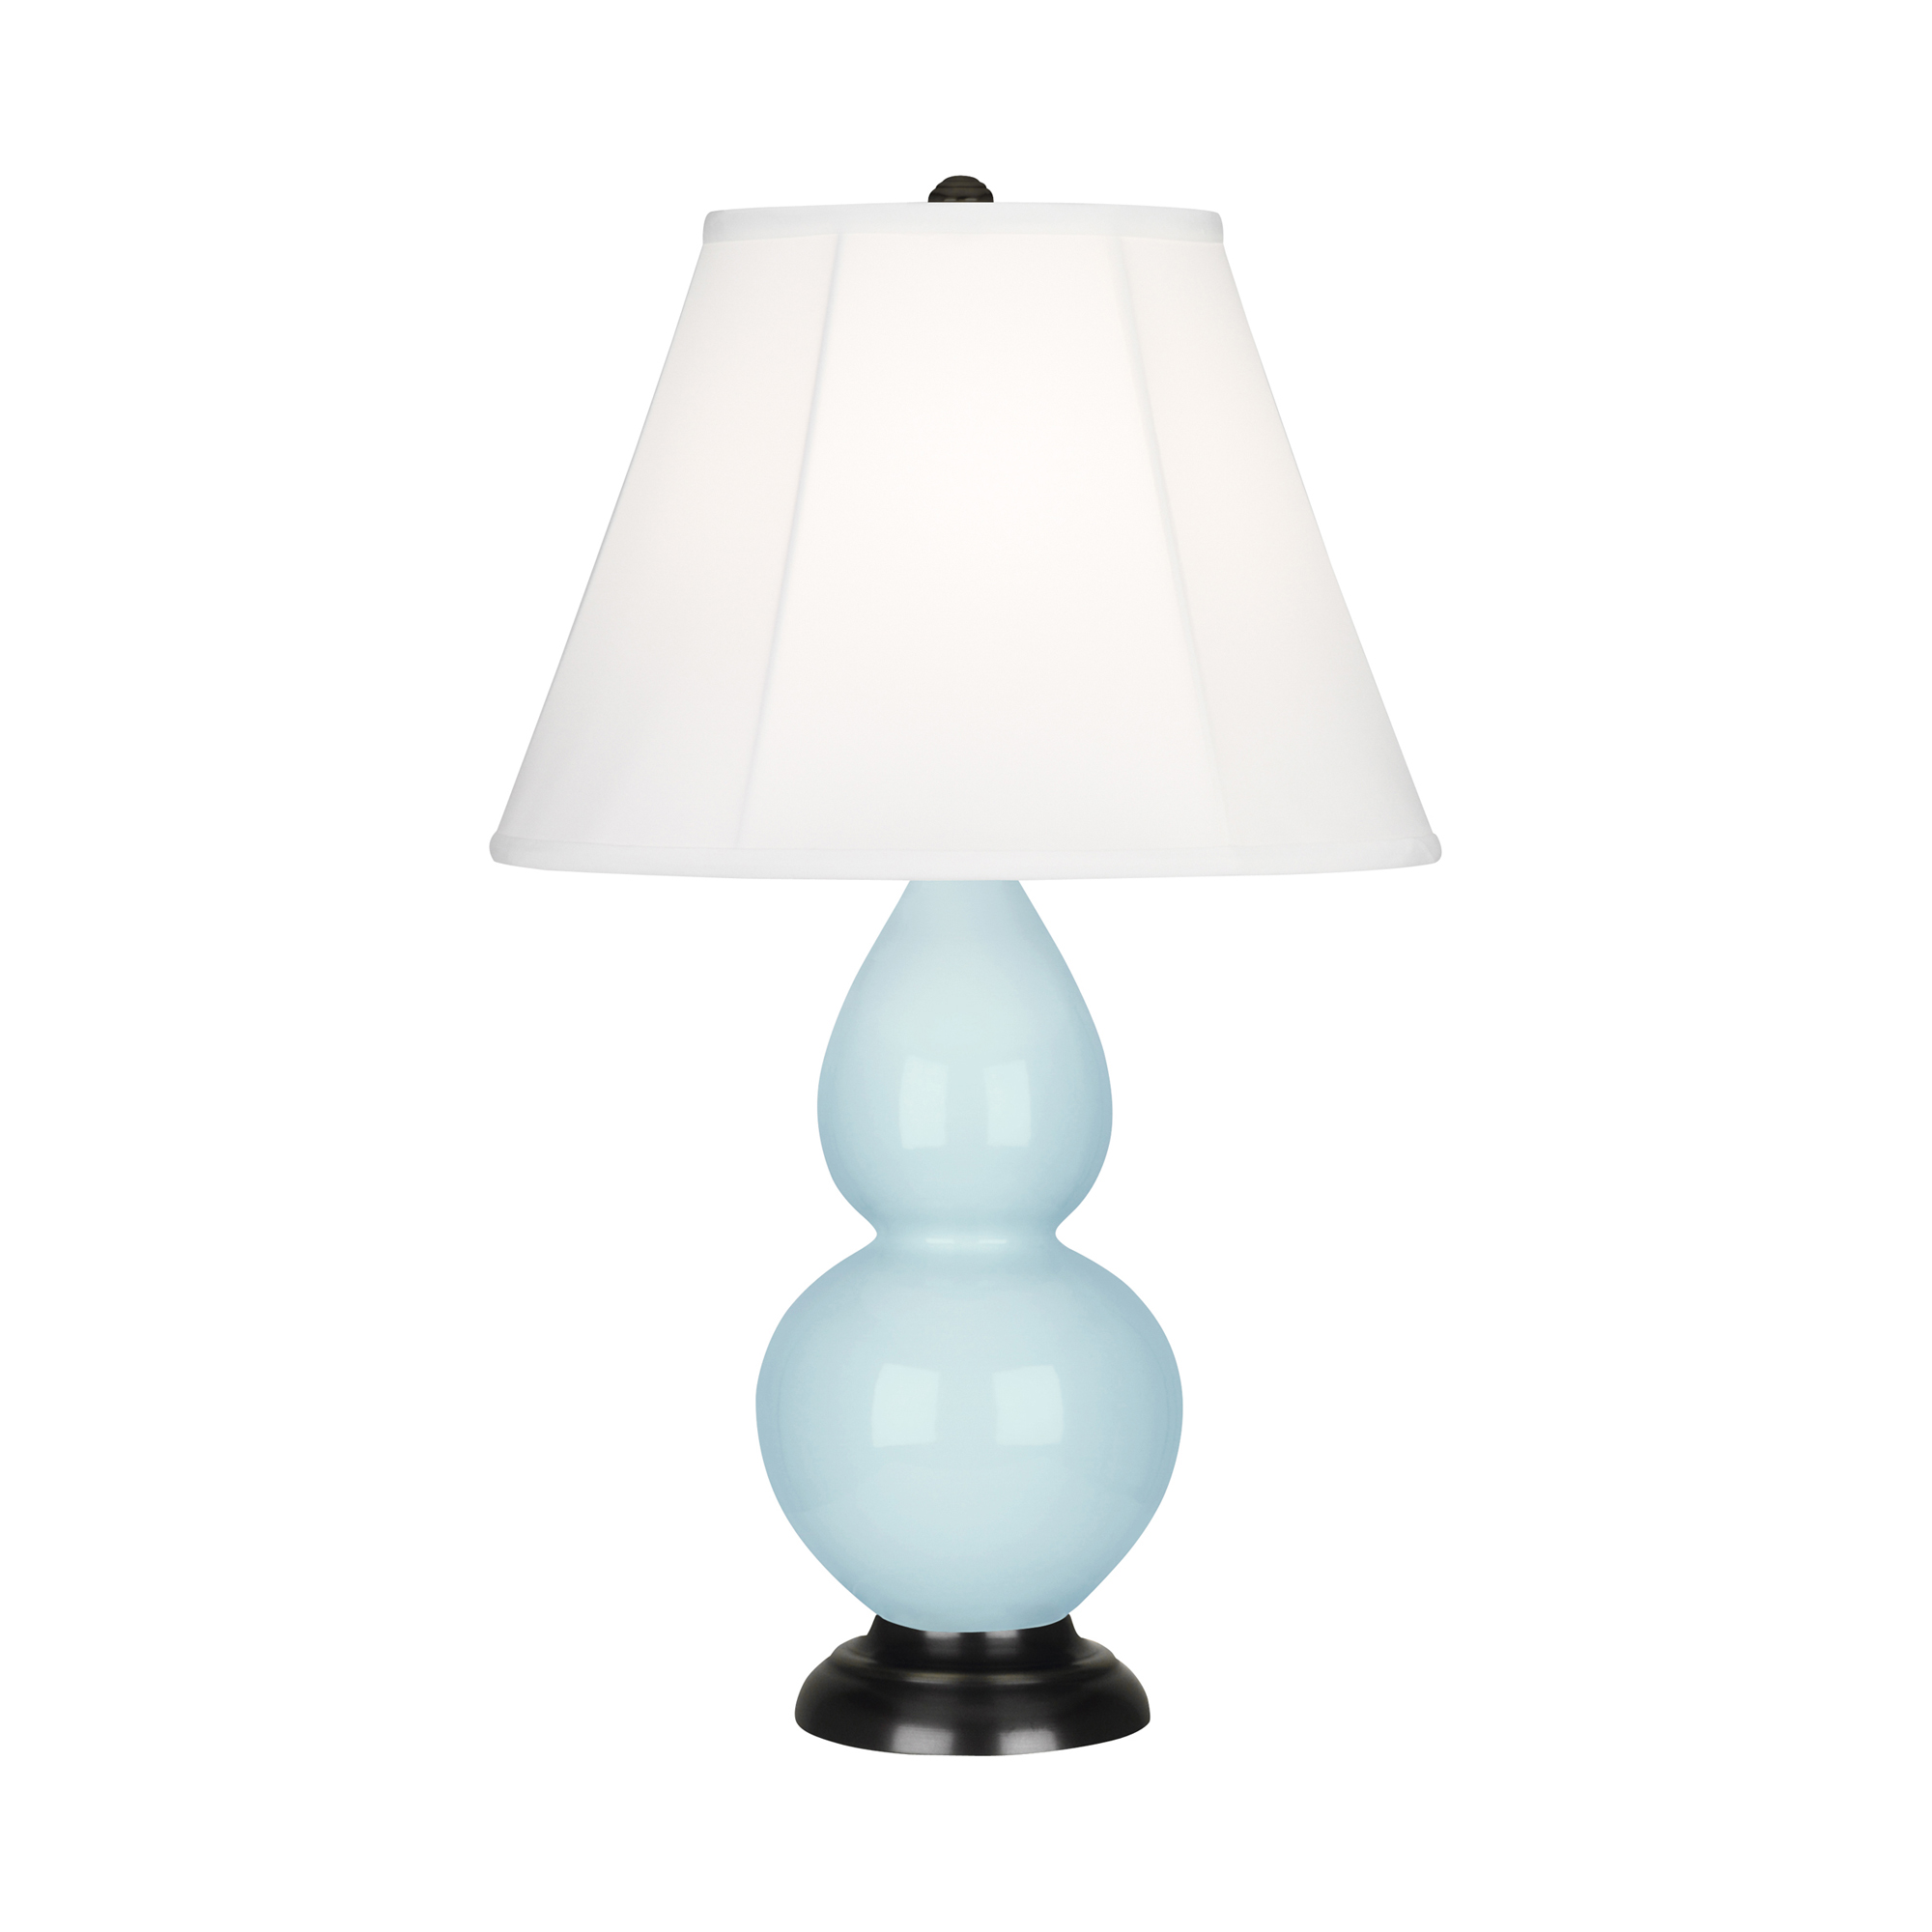 Small Double Gourd Accent Lamp Style #1656